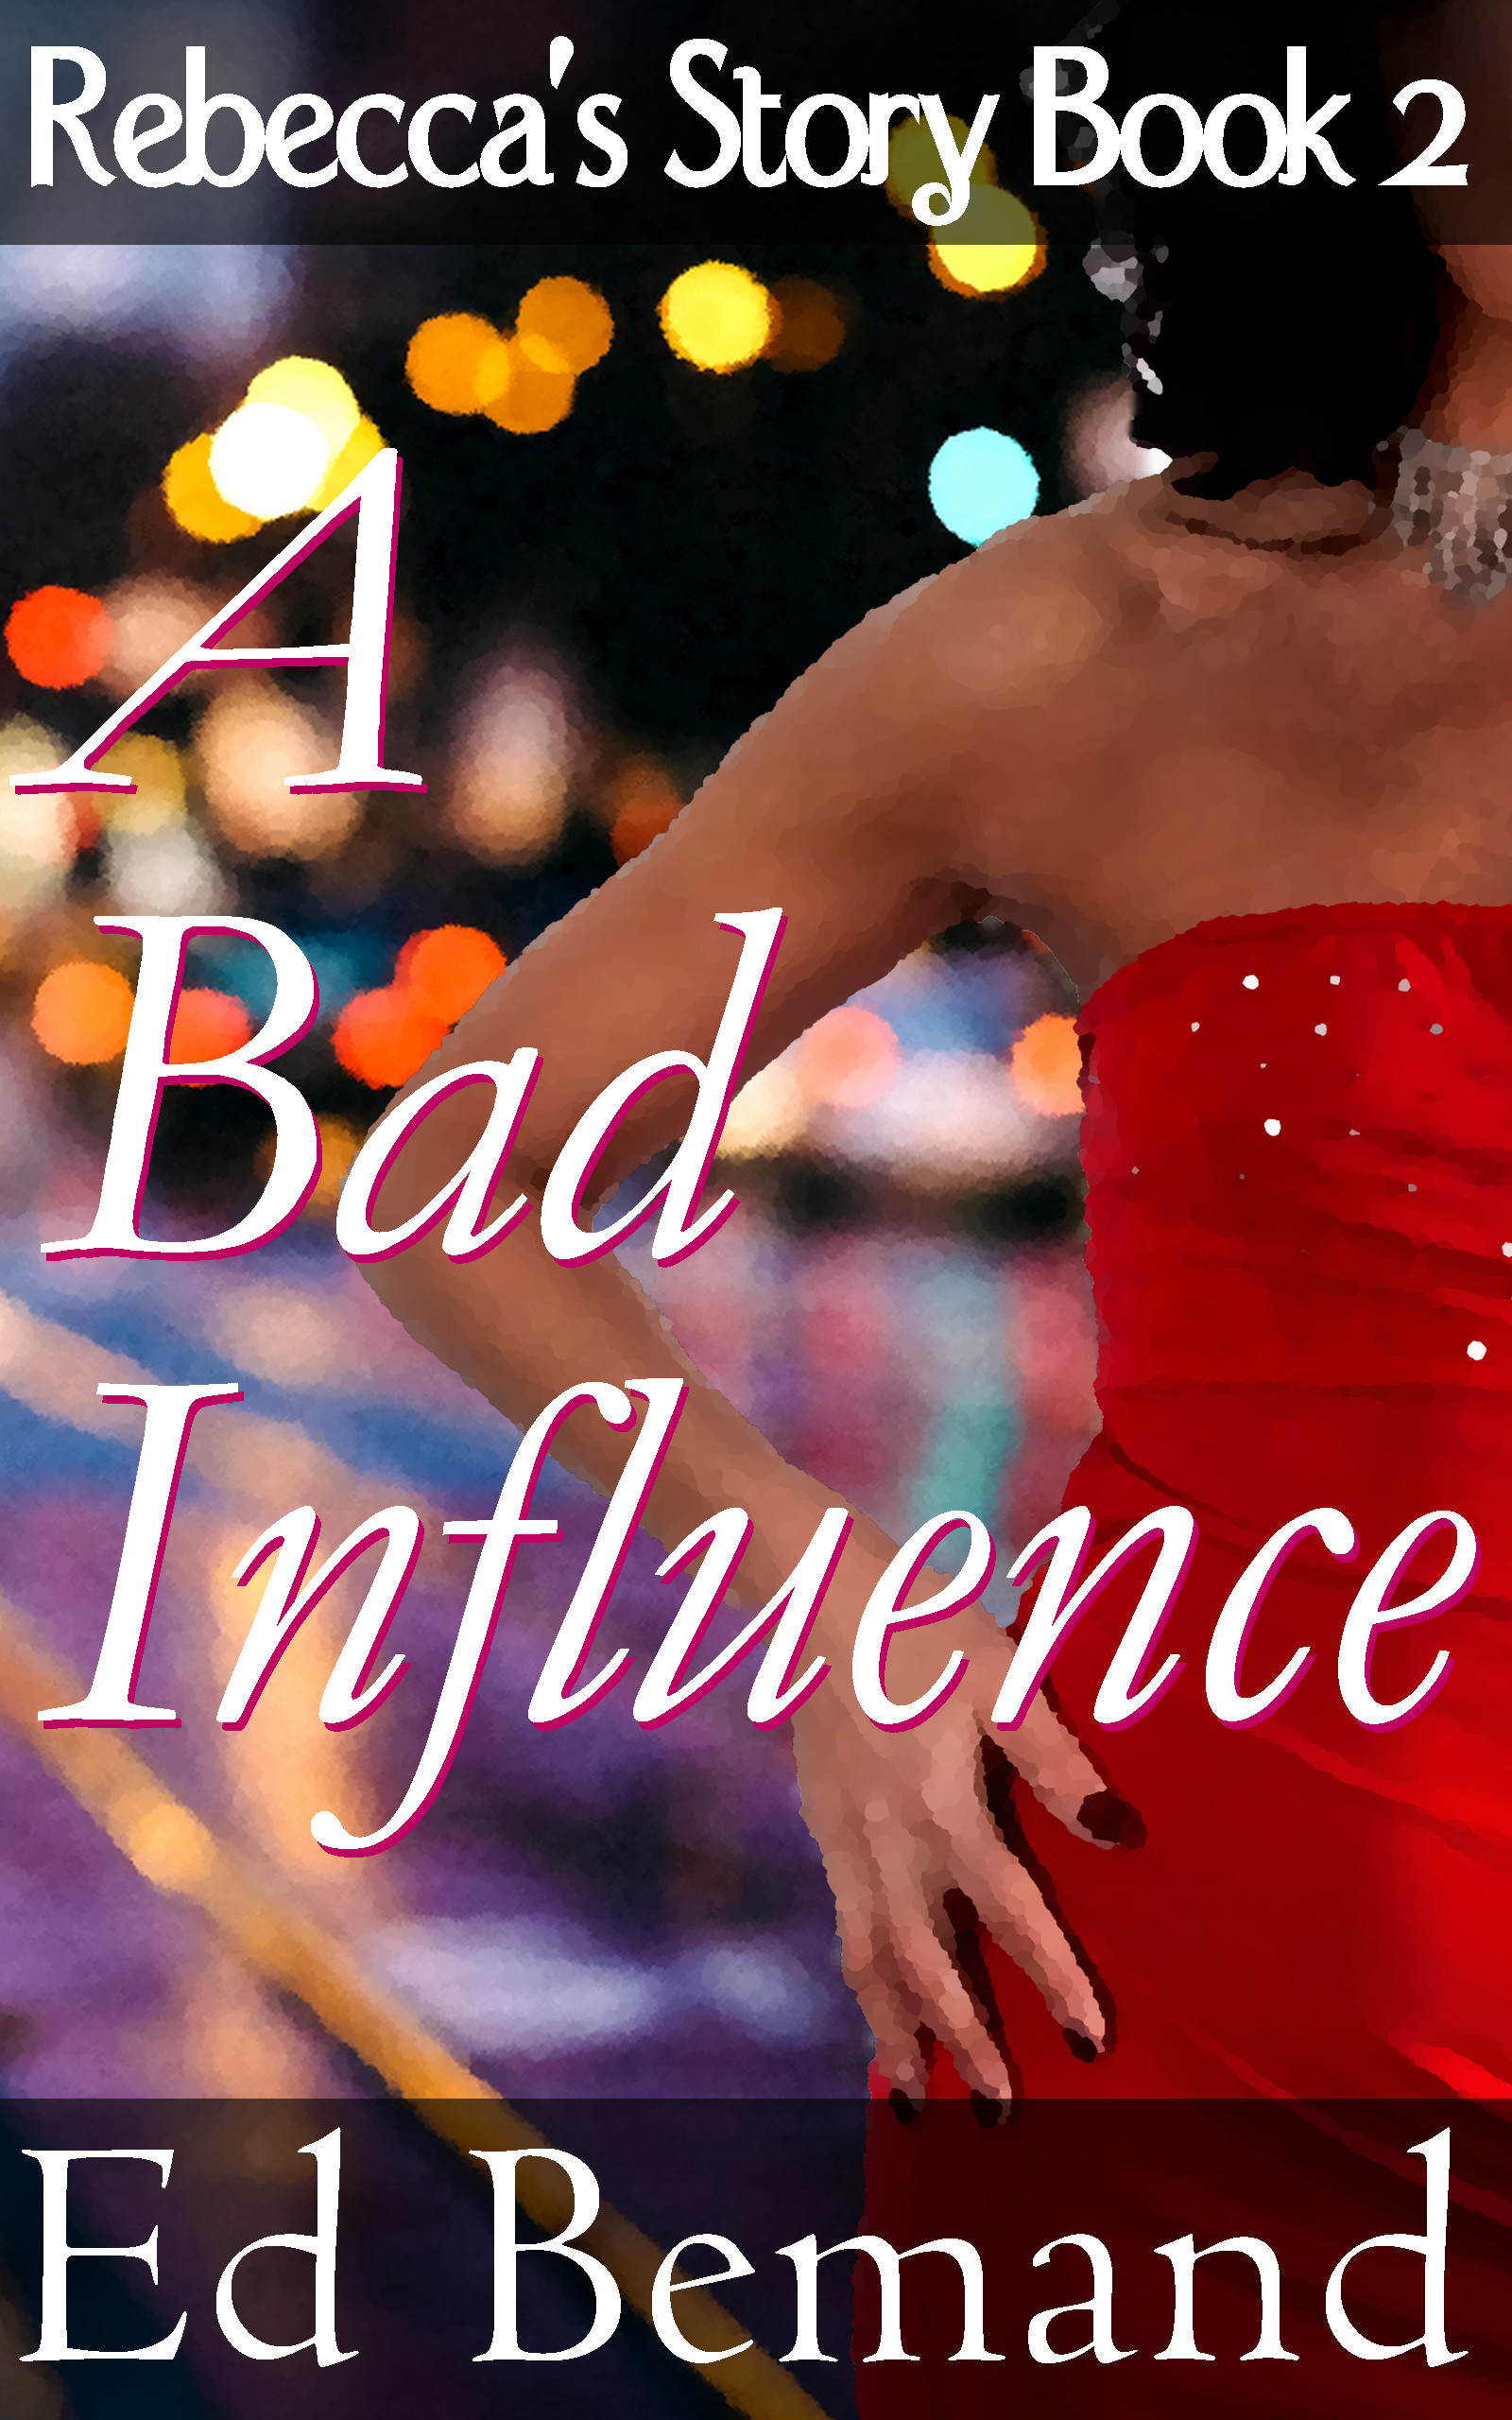 Rebecca's Story Book 2, A Bad Influence, by Ed bemand